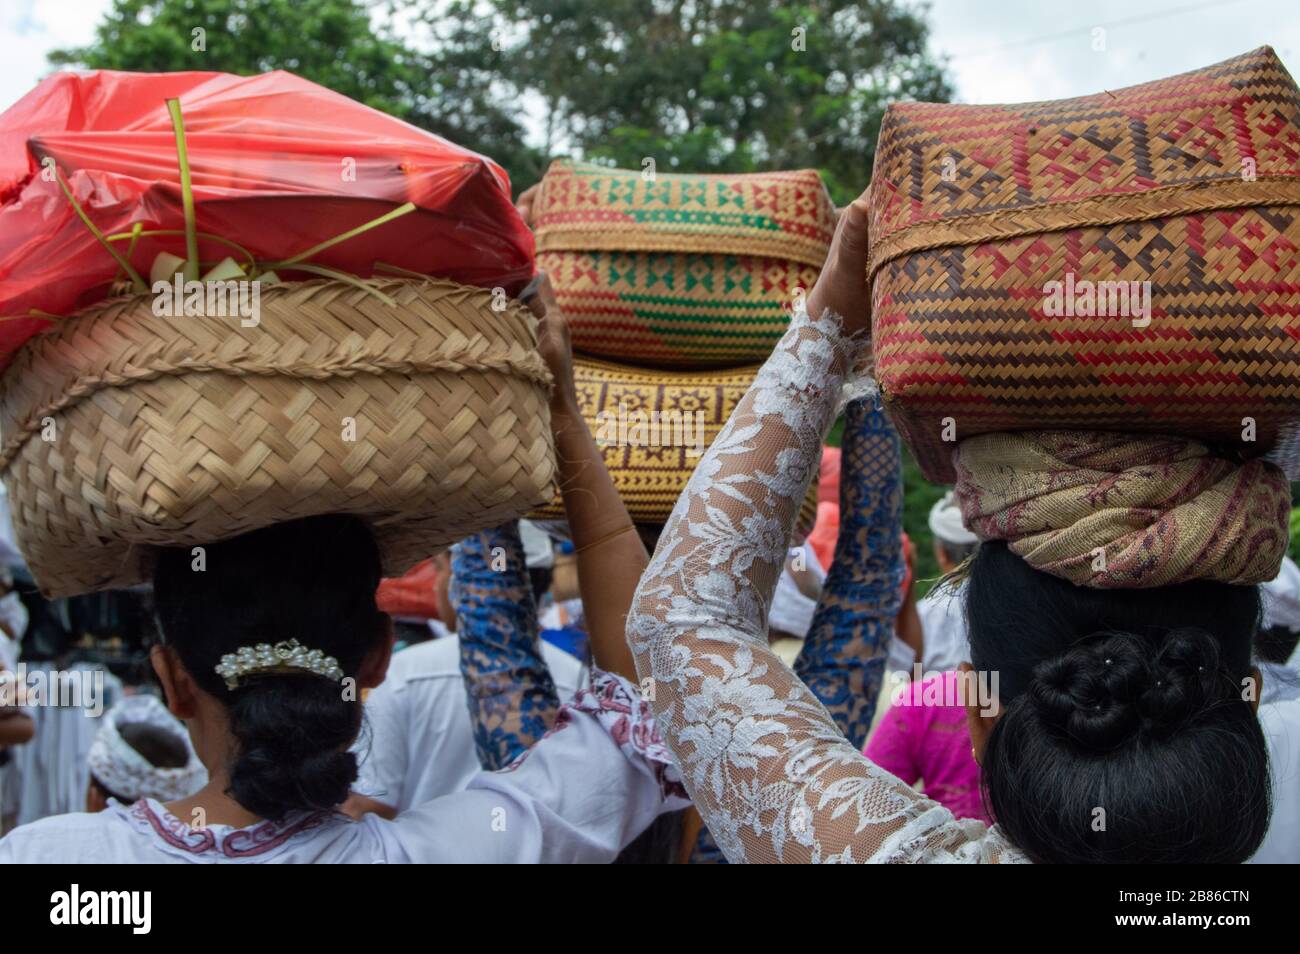 Indonesian women with basket over the head during the holy Celebration at Besakih temple. Bali, Indonesia Stock Photo